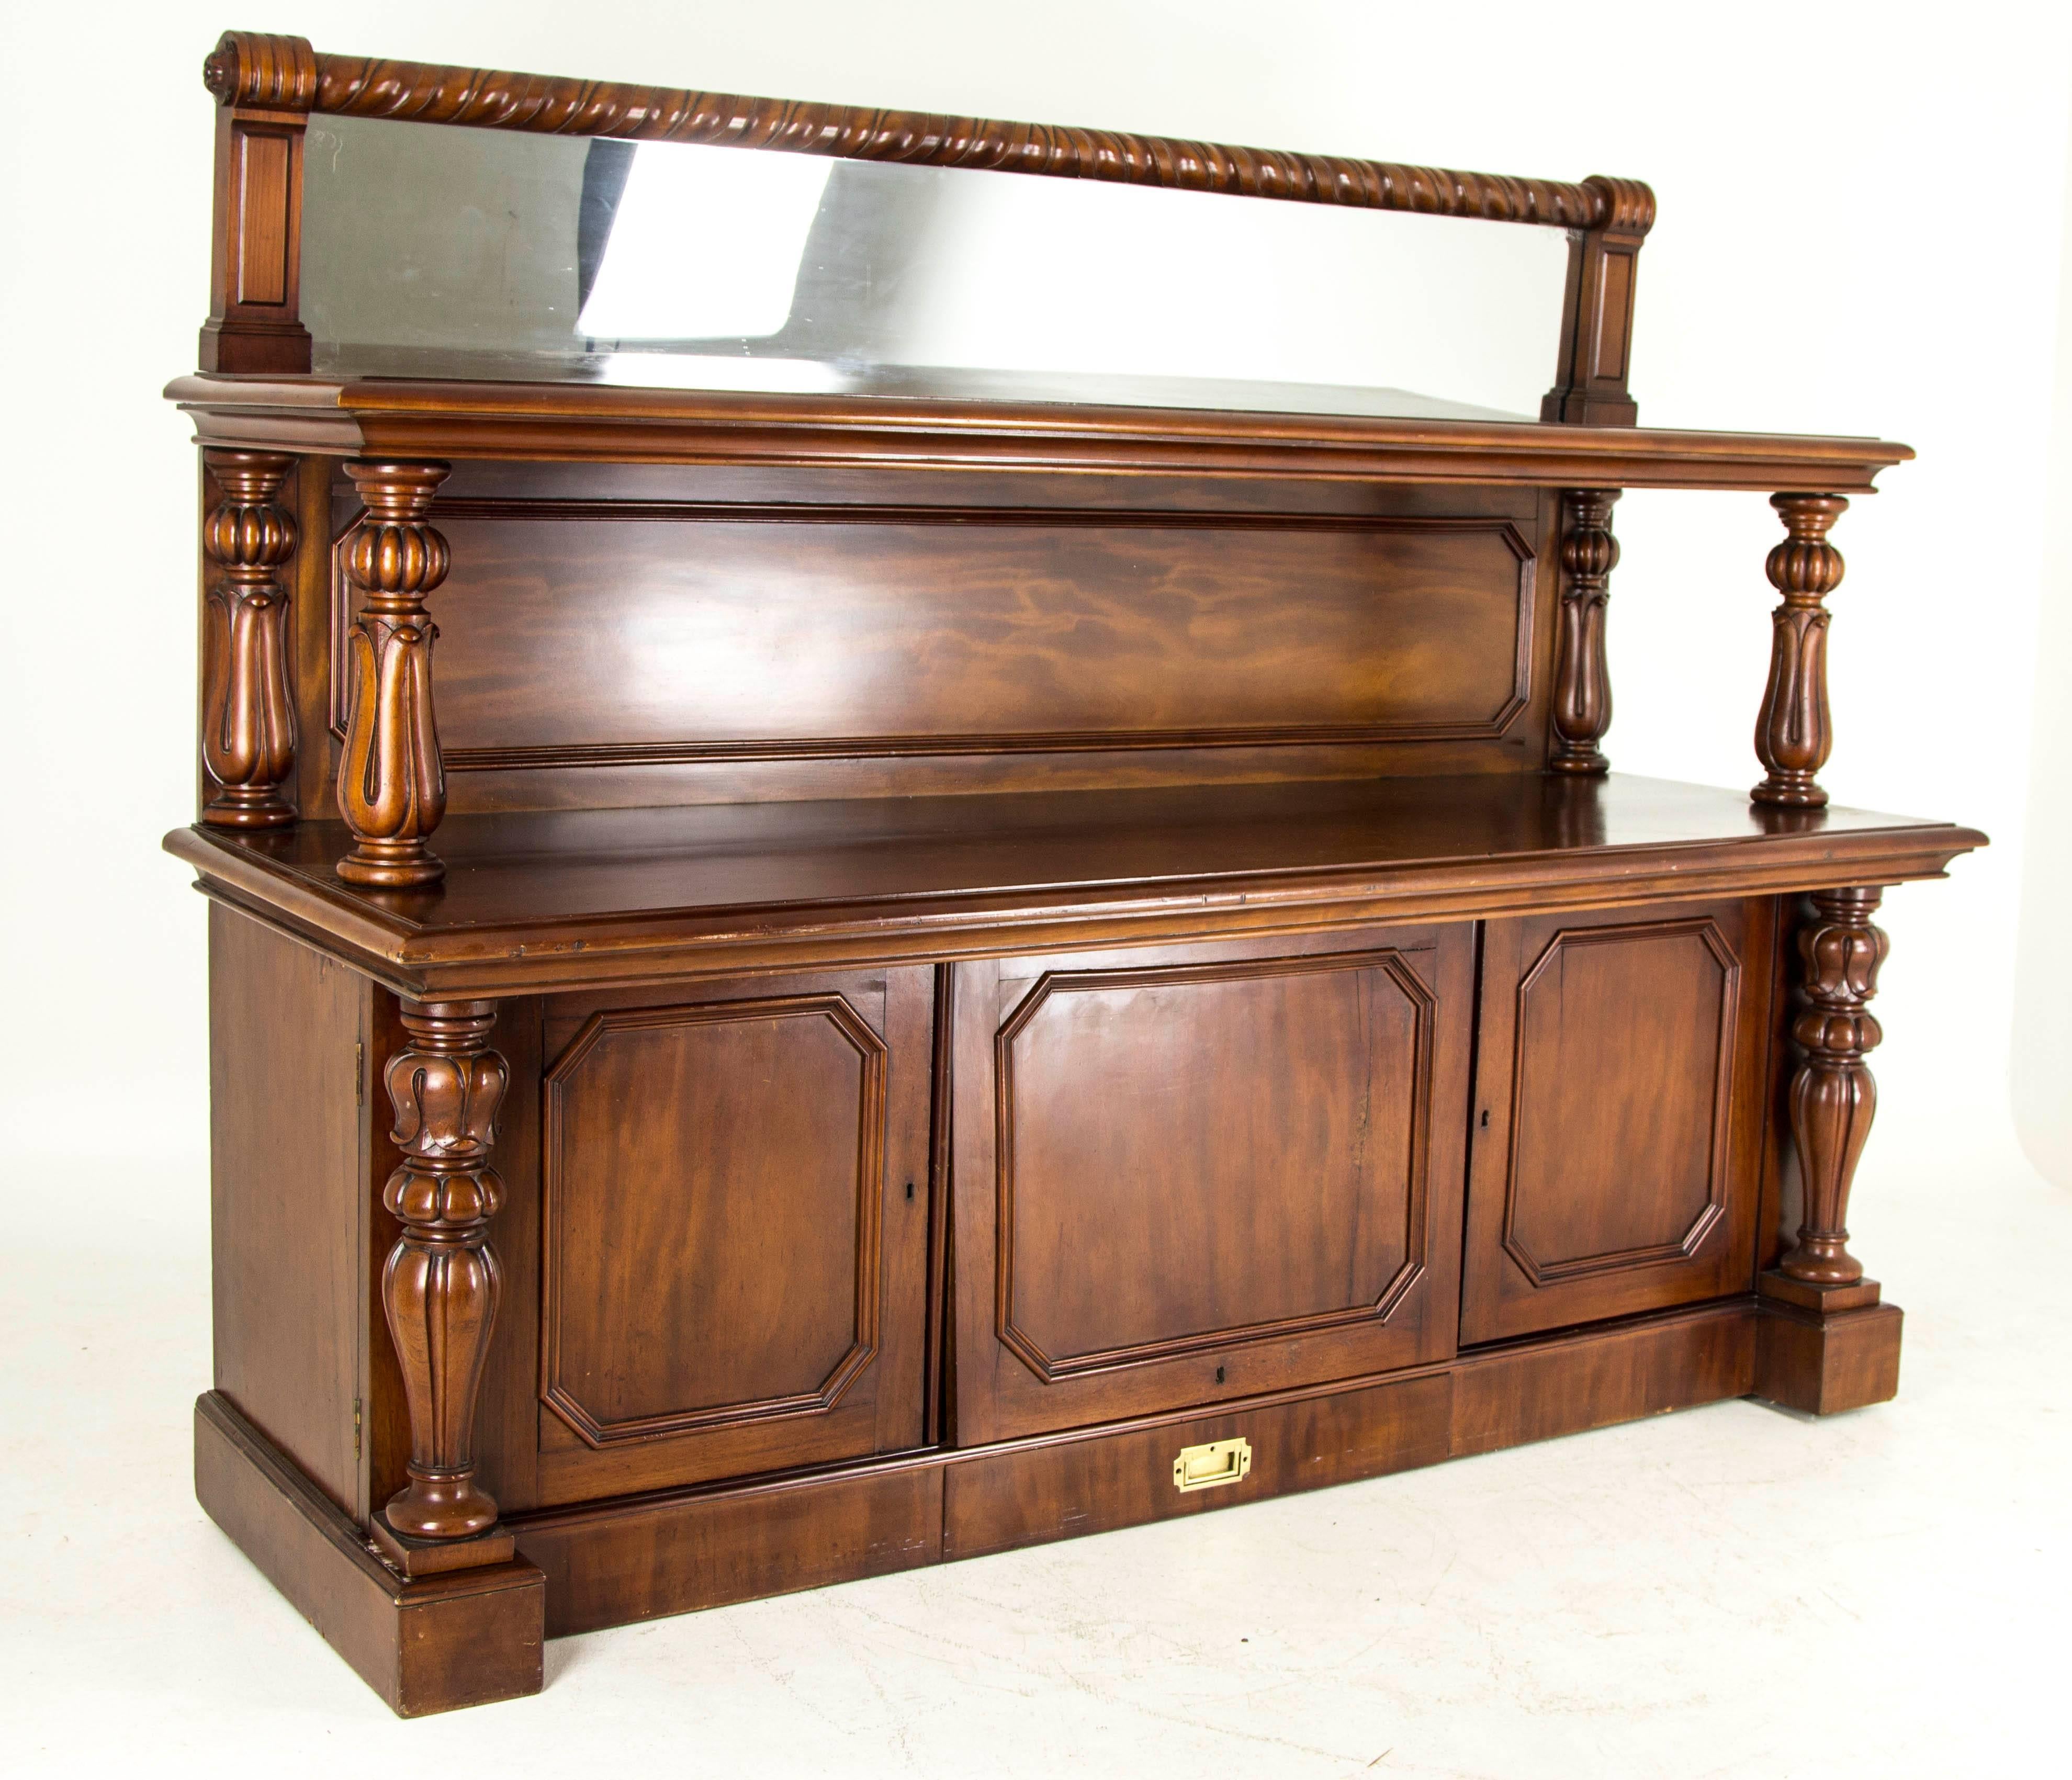 Scotland 
1870
Solid Walnut and mahogany veneers
Original finish
Mirrored back with top shelf
Four pillars below with large top
Three cupboards below opening to reveal central bottle holder flanked by two cupboards
Single brass handled drawers